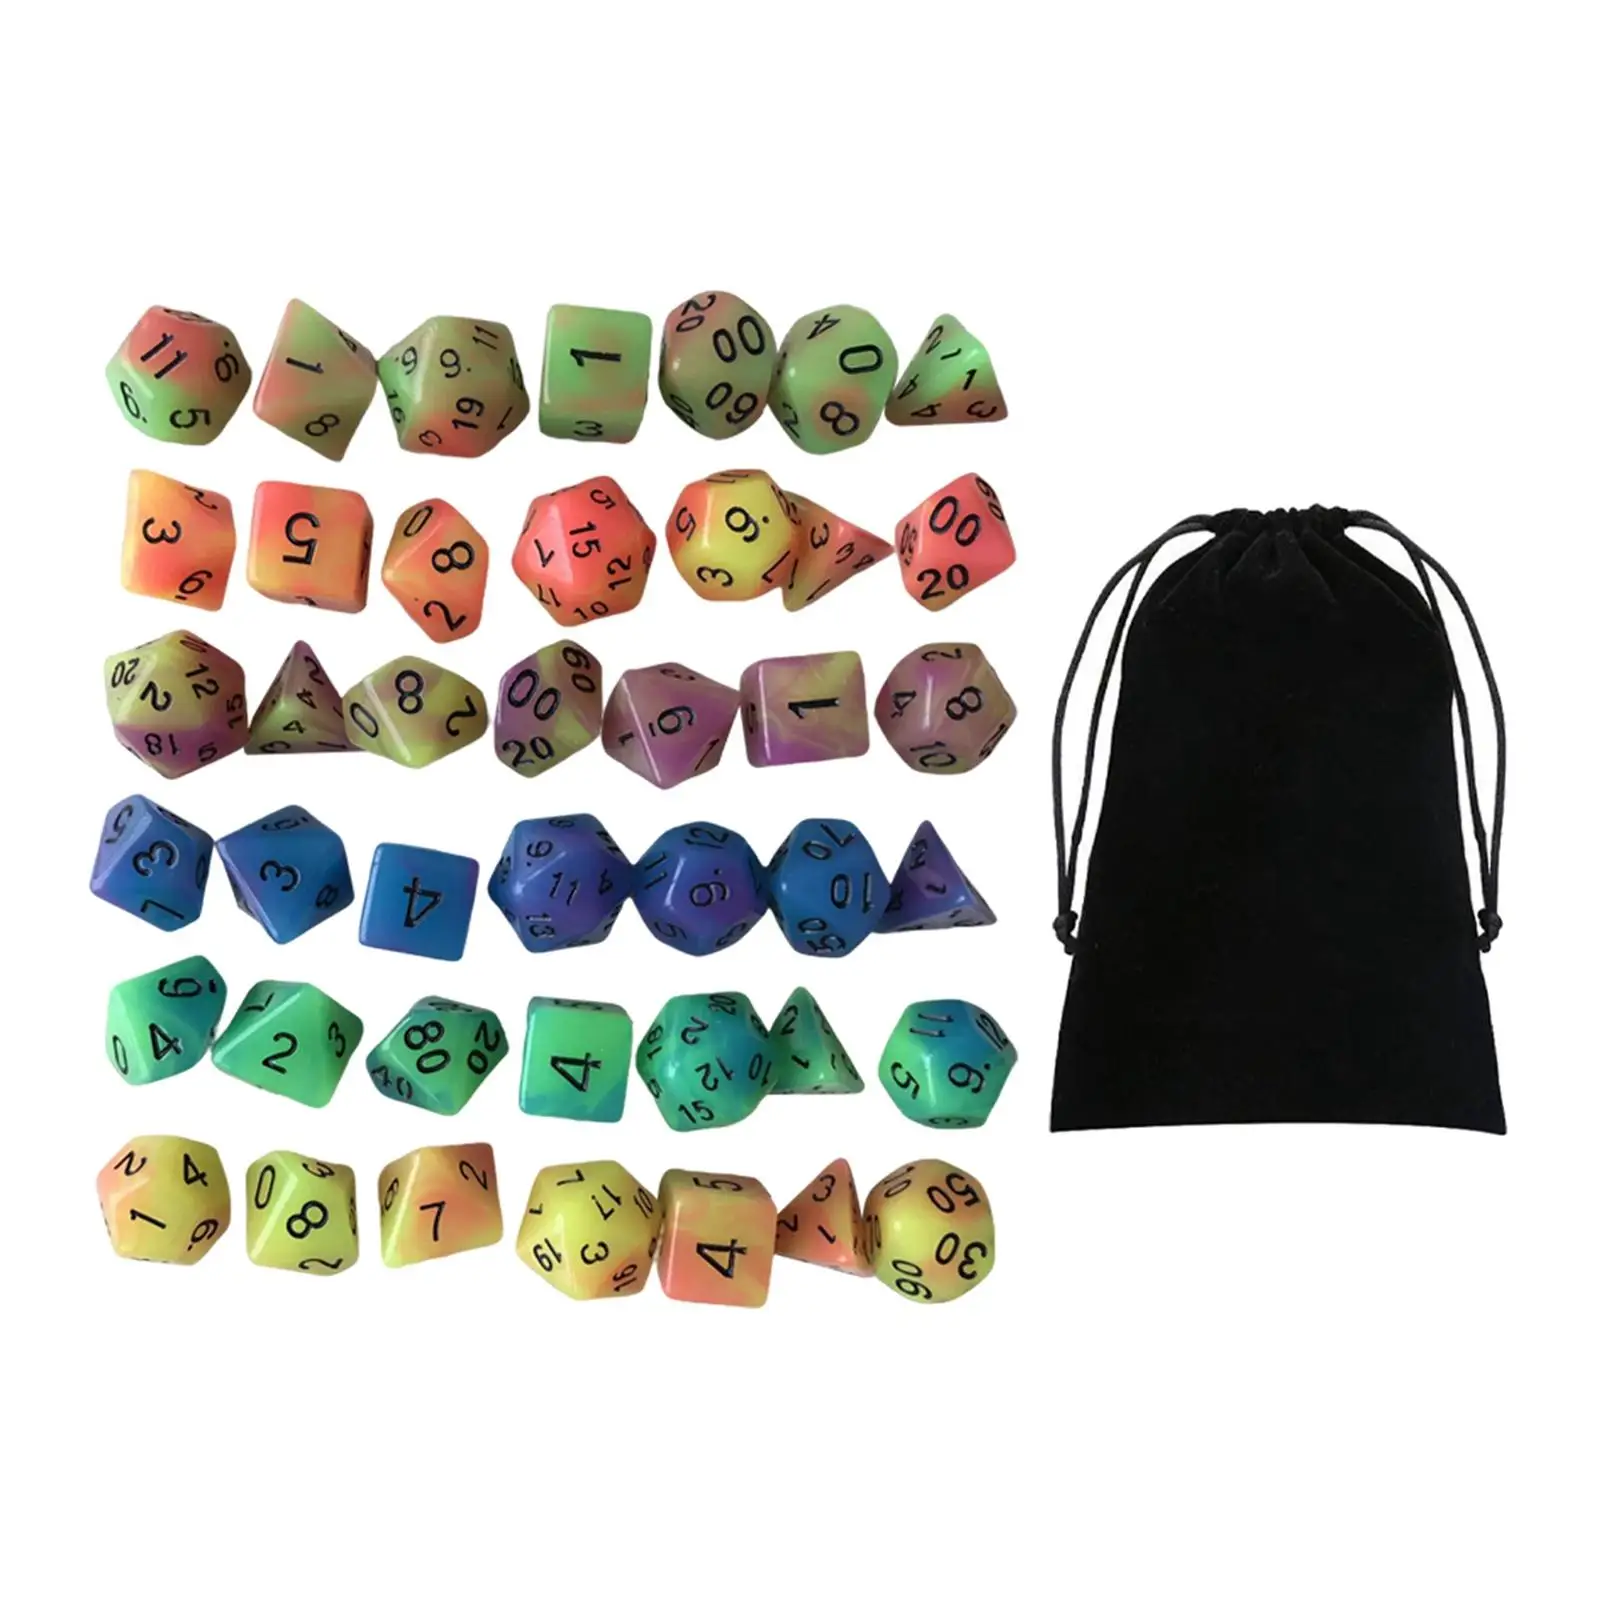 Acrylic Glowing Polyhedral Dices Set D8 D10 D12 D20 with Pouch for MTG